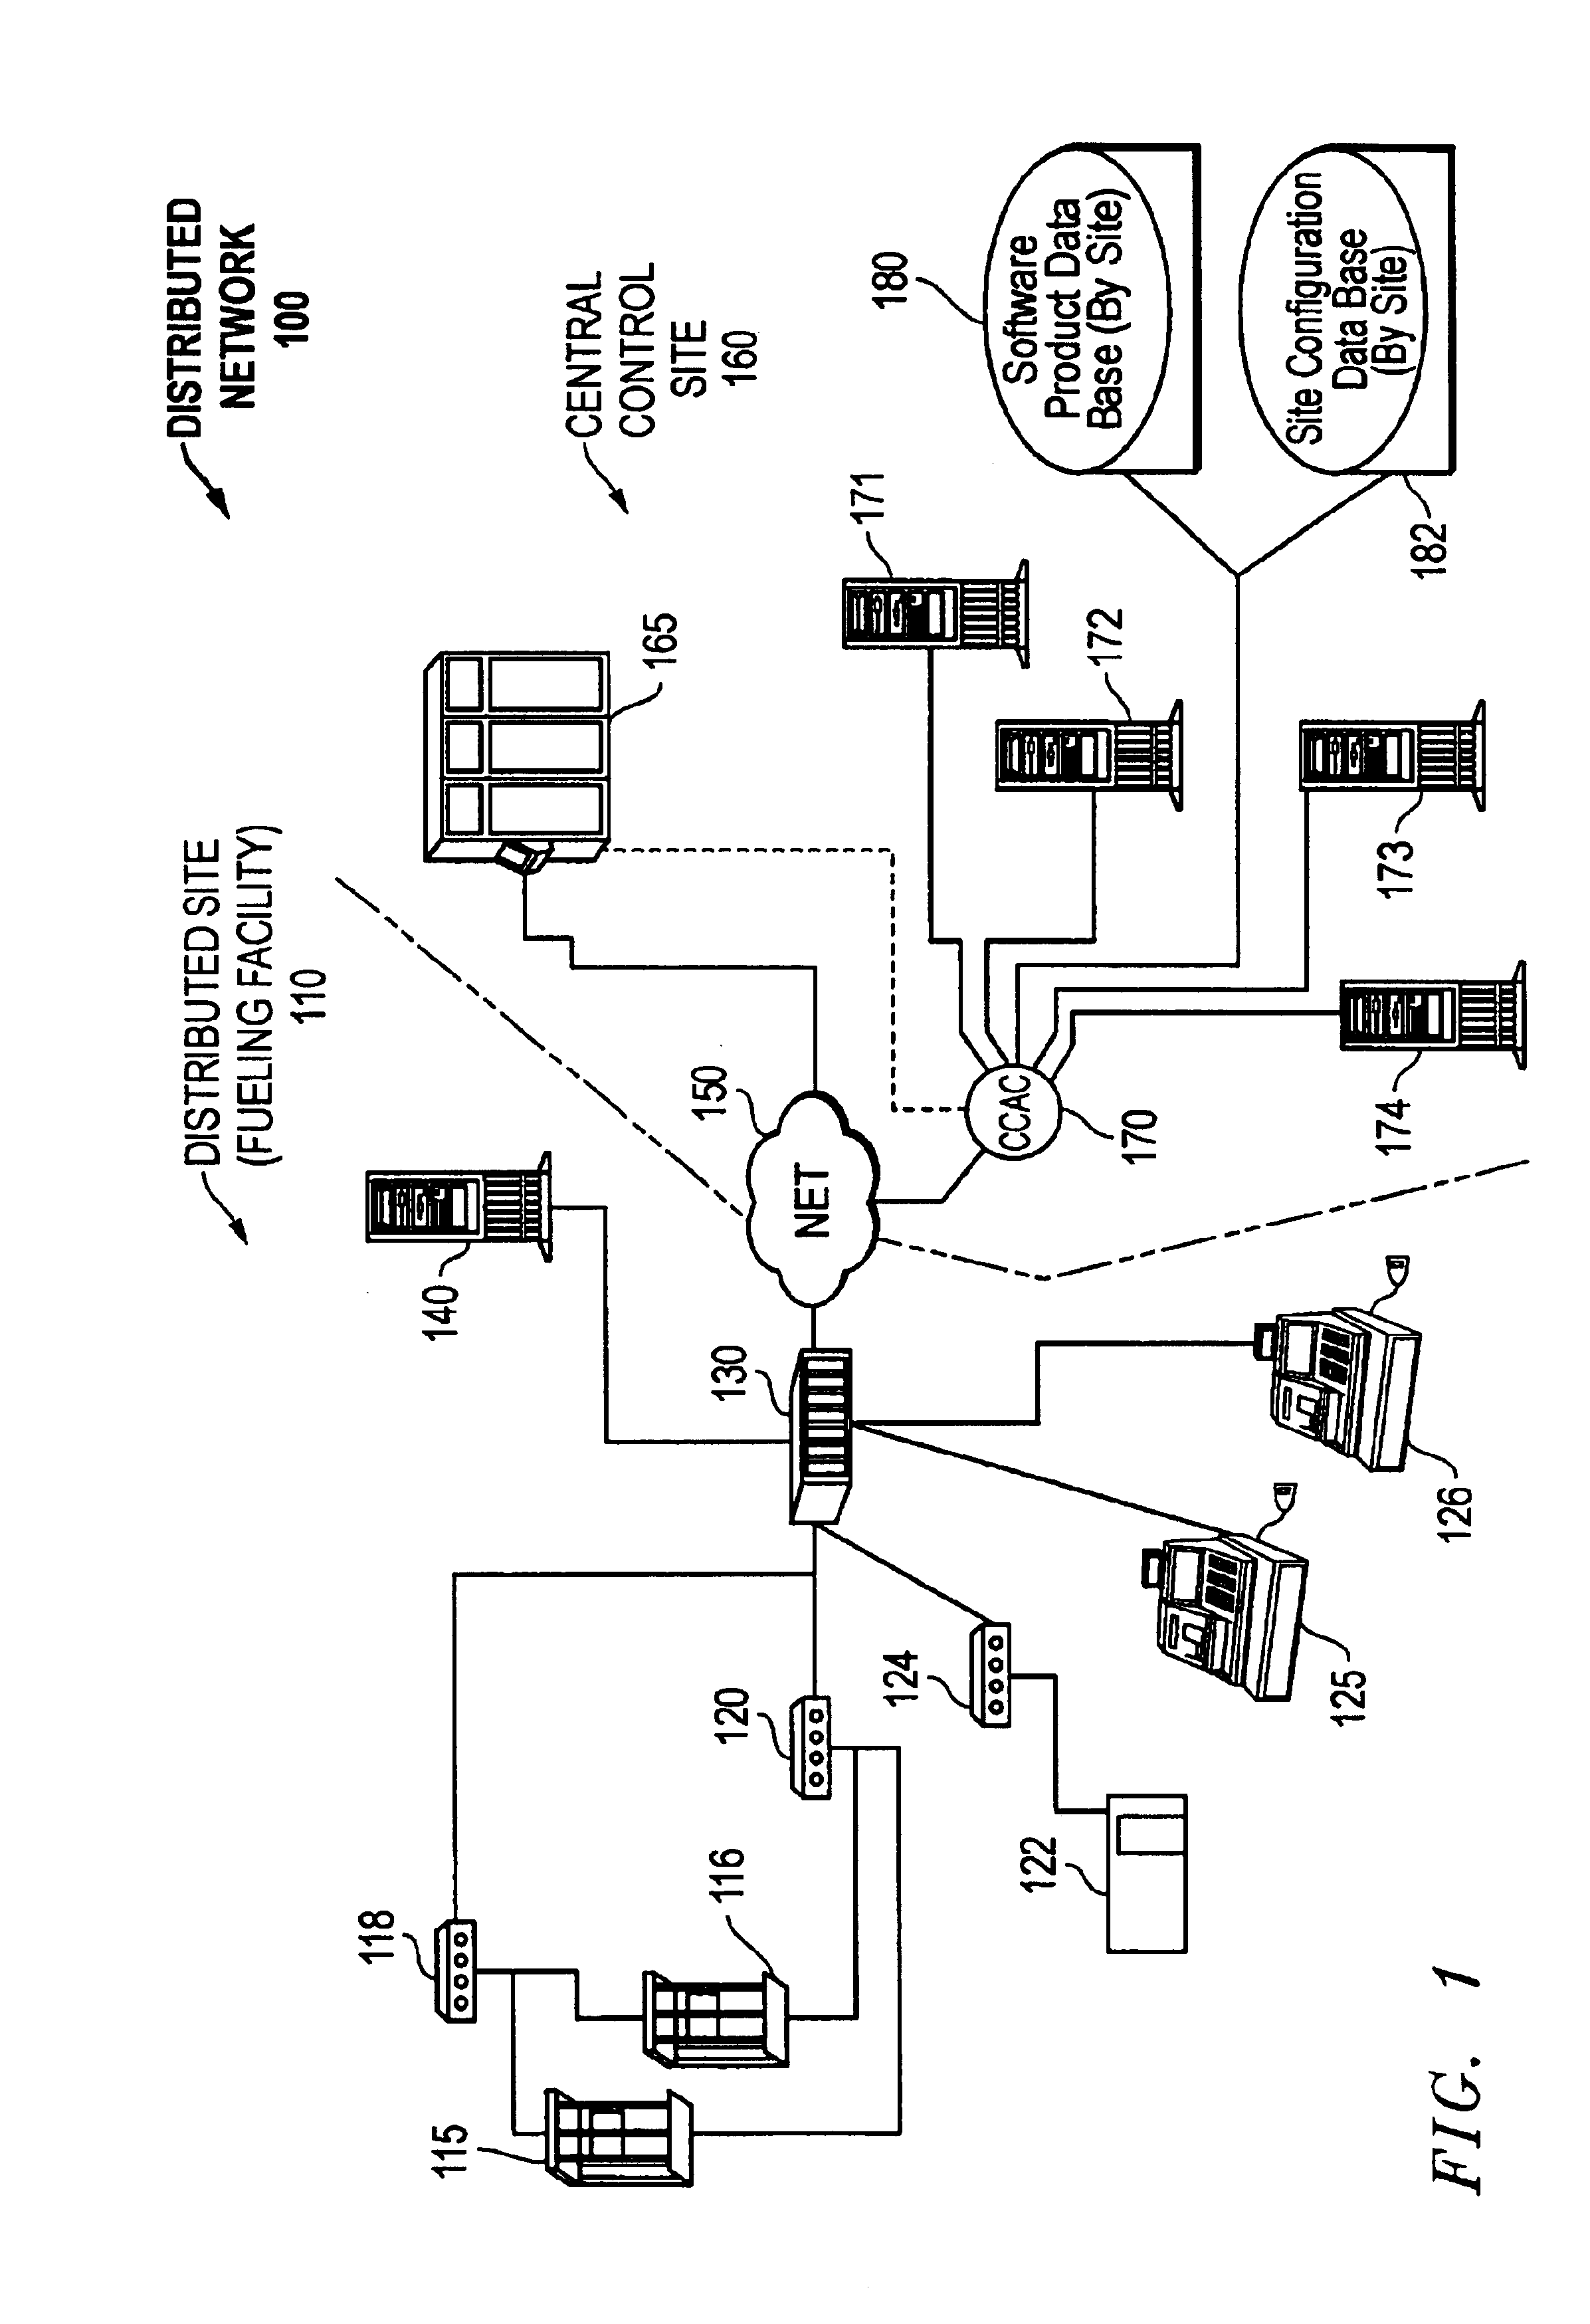 System and method for backing up distributed controllers in a data network